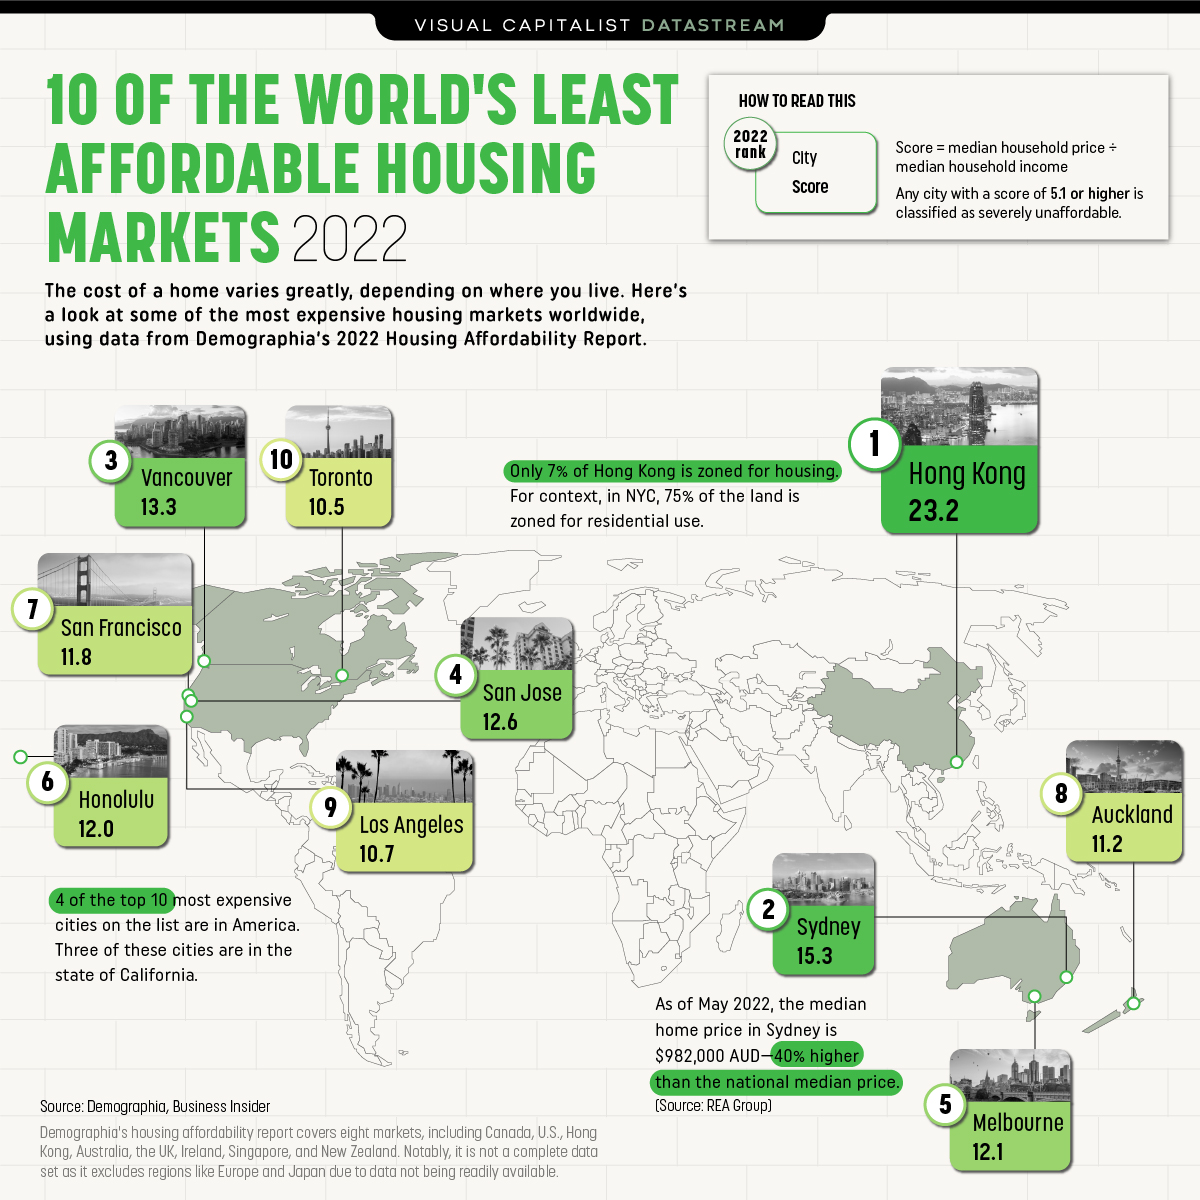 Map looking at some of the expensive housing markets worldwide